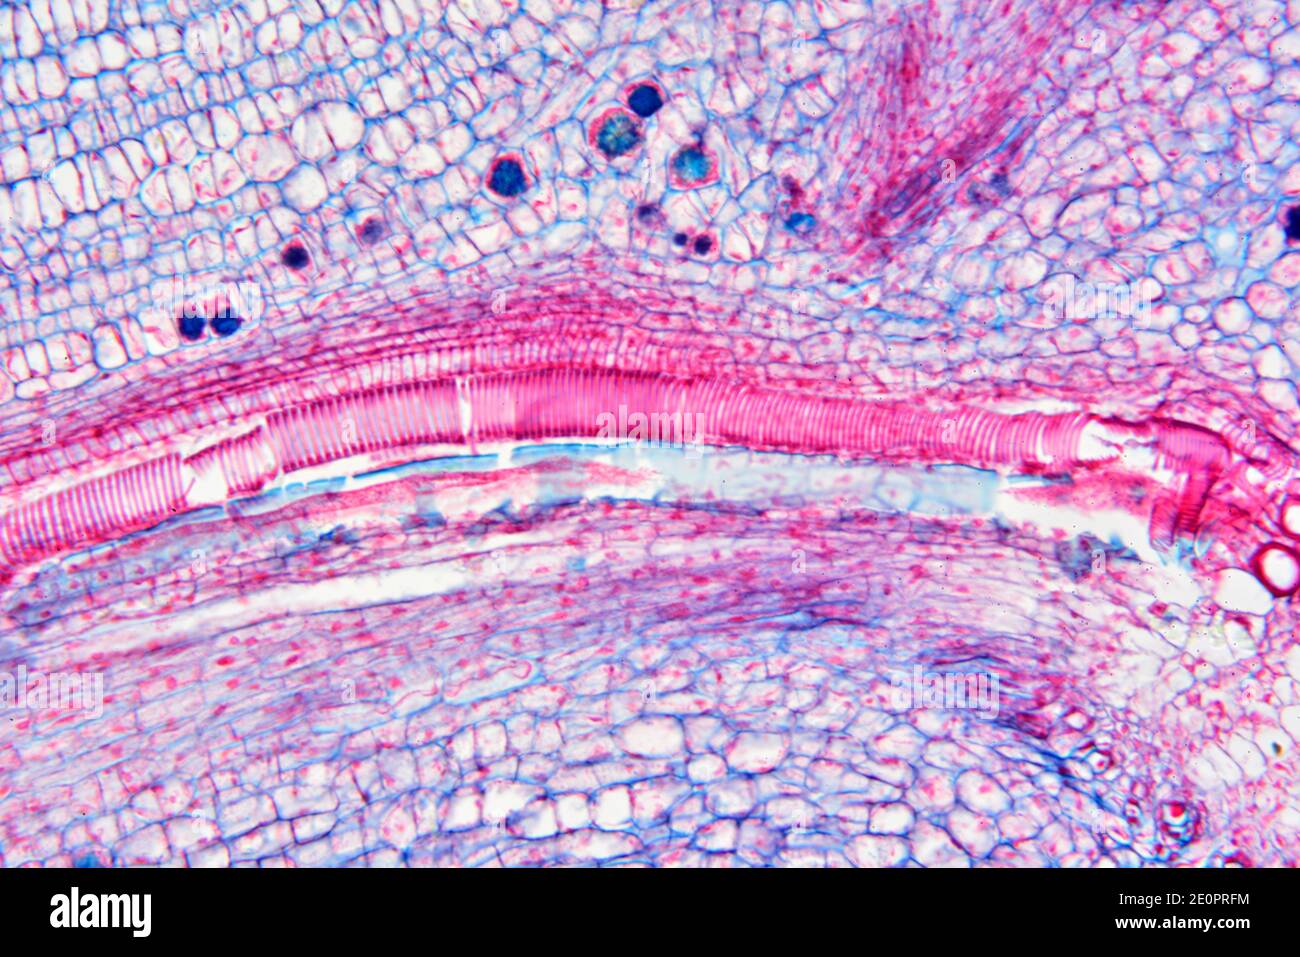 Vascular plant stem with spiral xylem. Photomicrograph X100 at 10 cm wide. Stock Photo